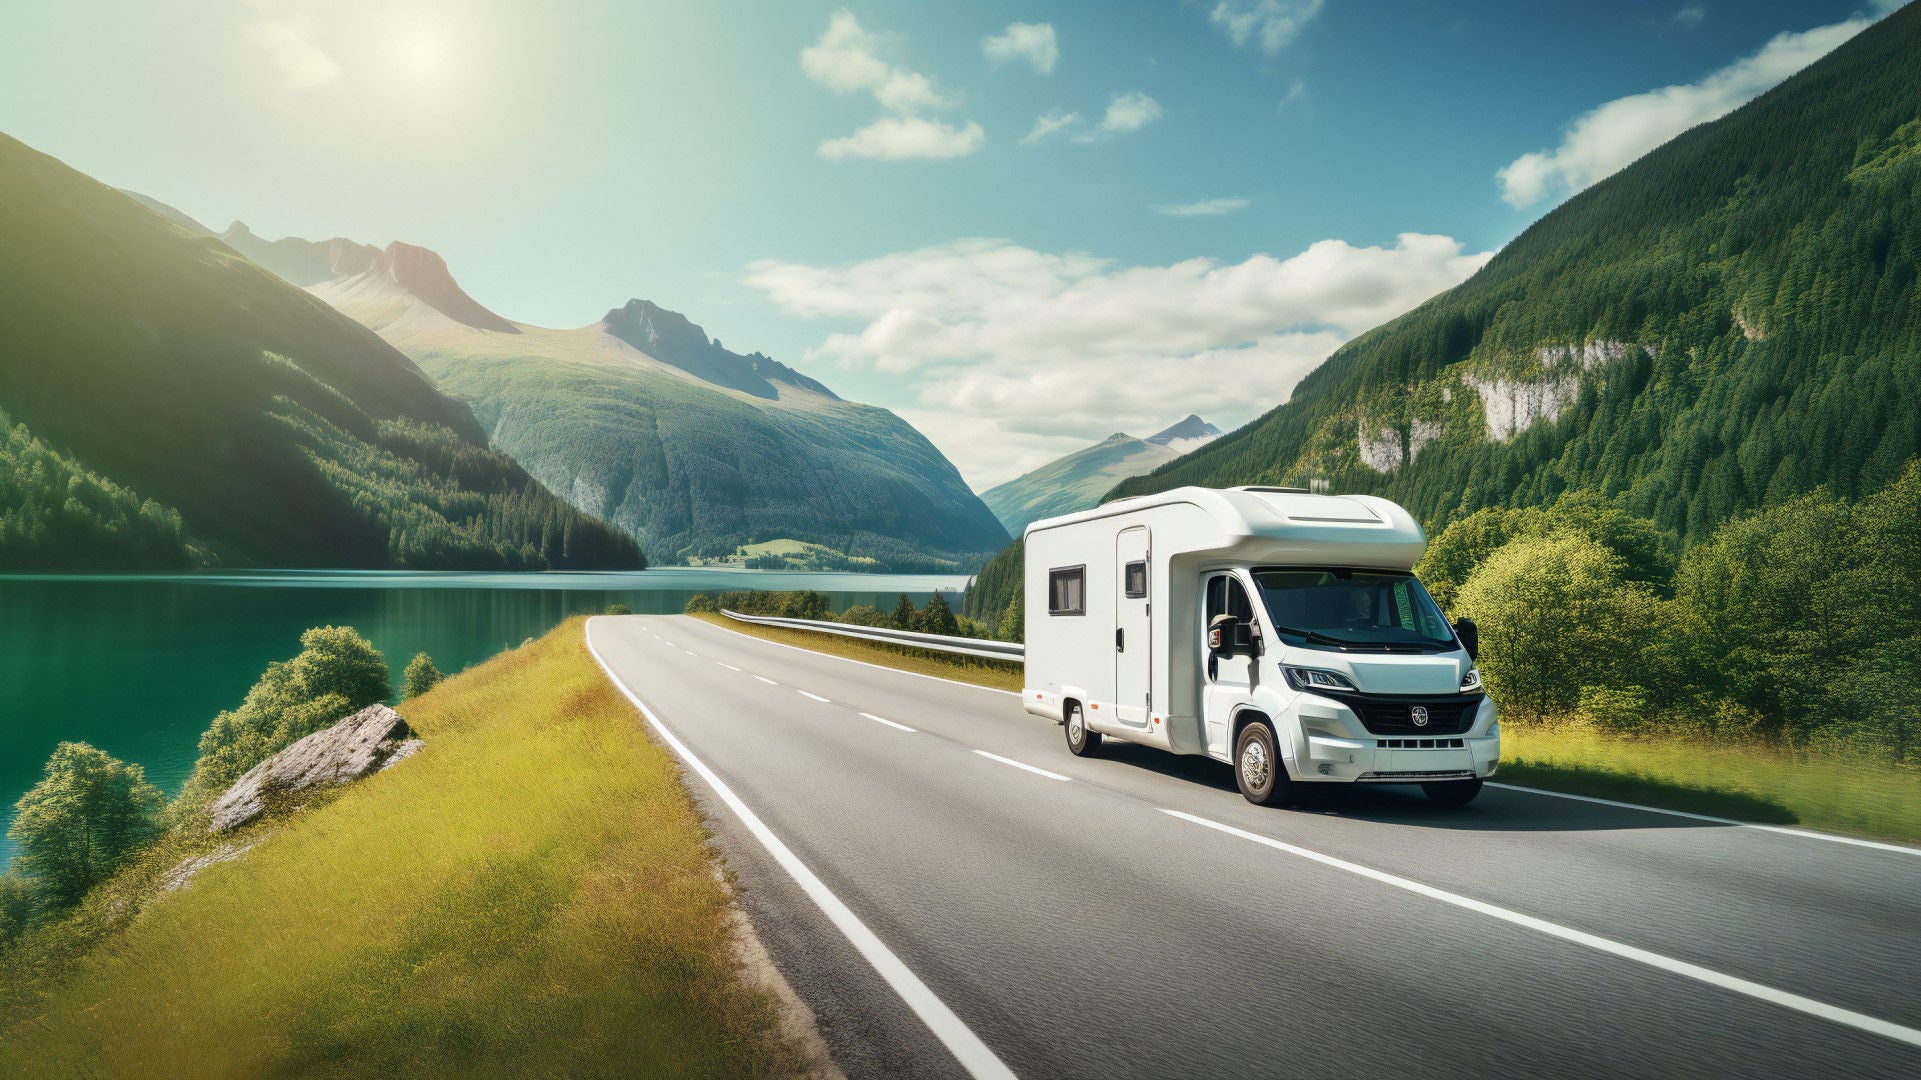 Recreational vehicle in landscape with lake